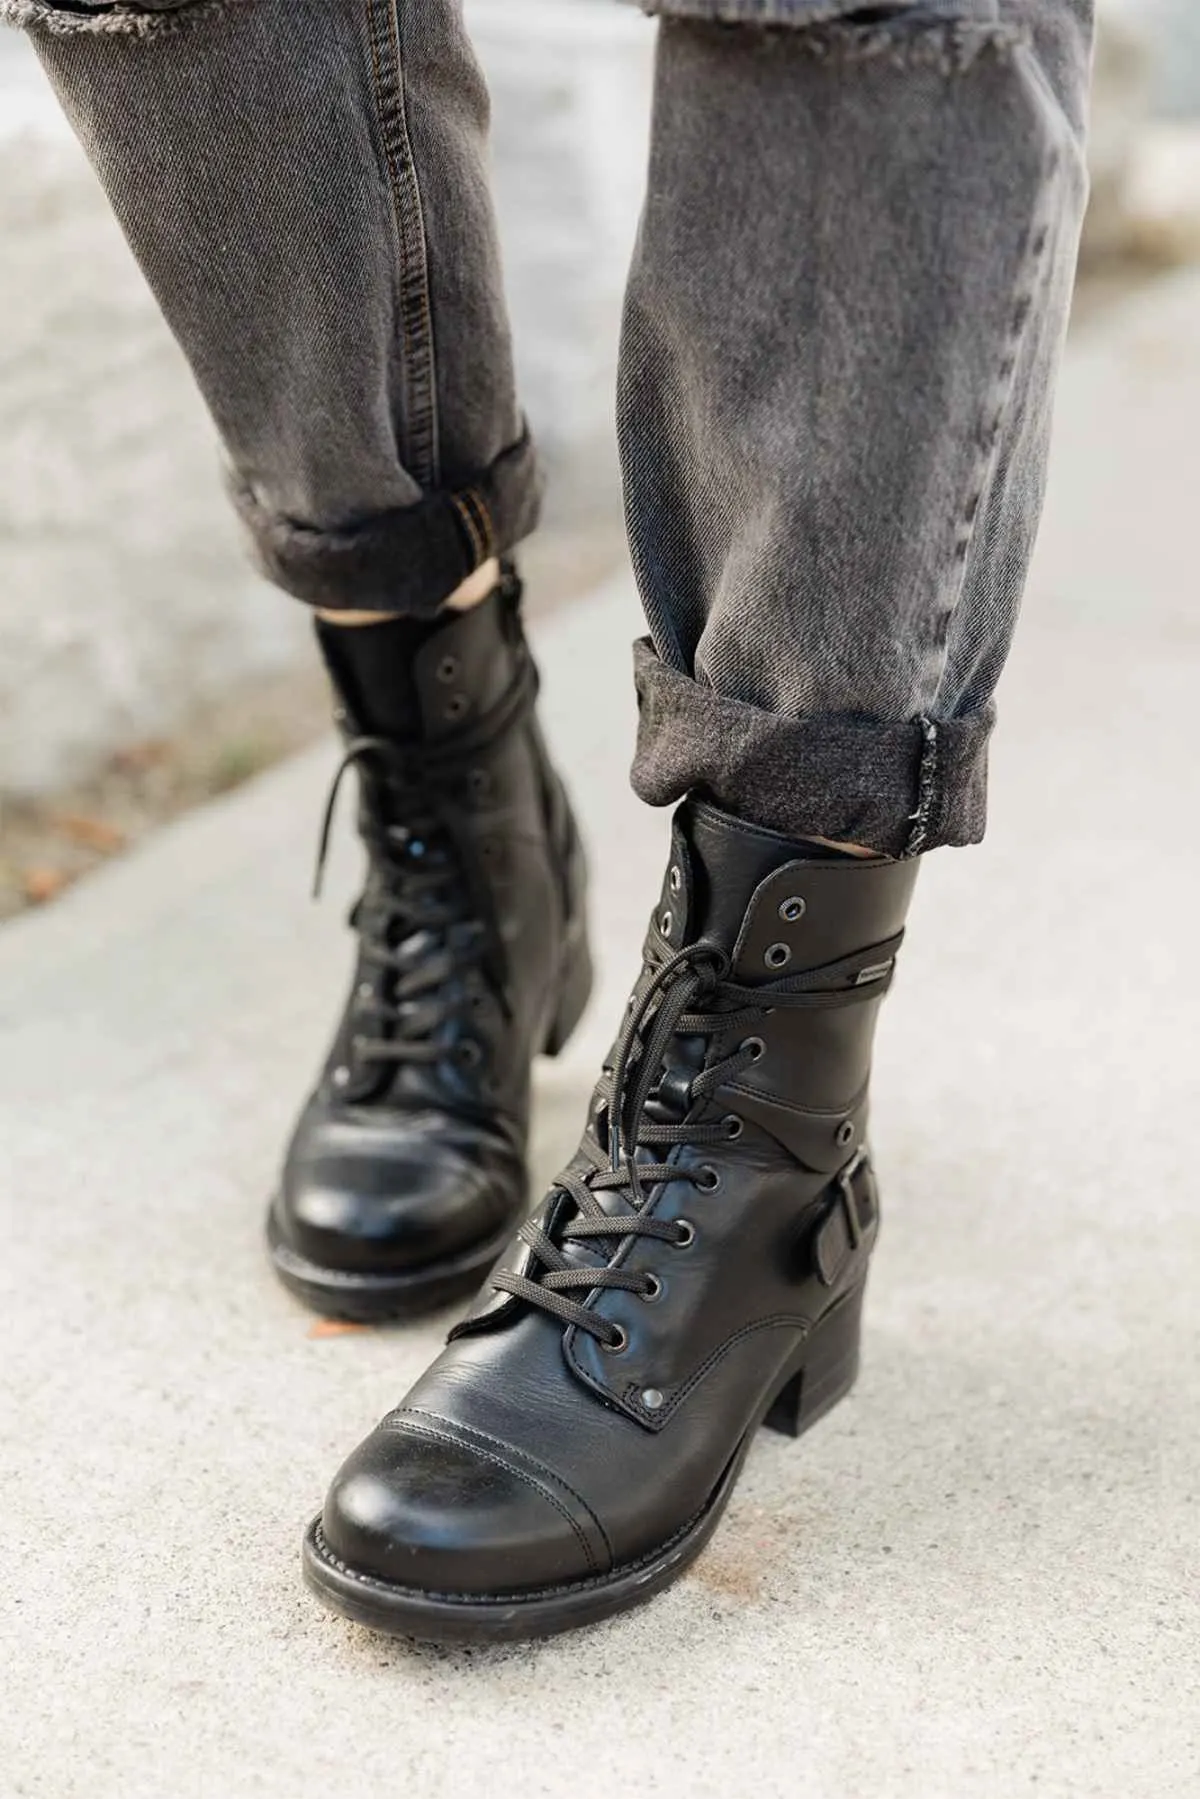 Front cropped view of woman's feet wearing Taos crave combat boots in black waterproof with cuffed grey jeans on a sidewalk.